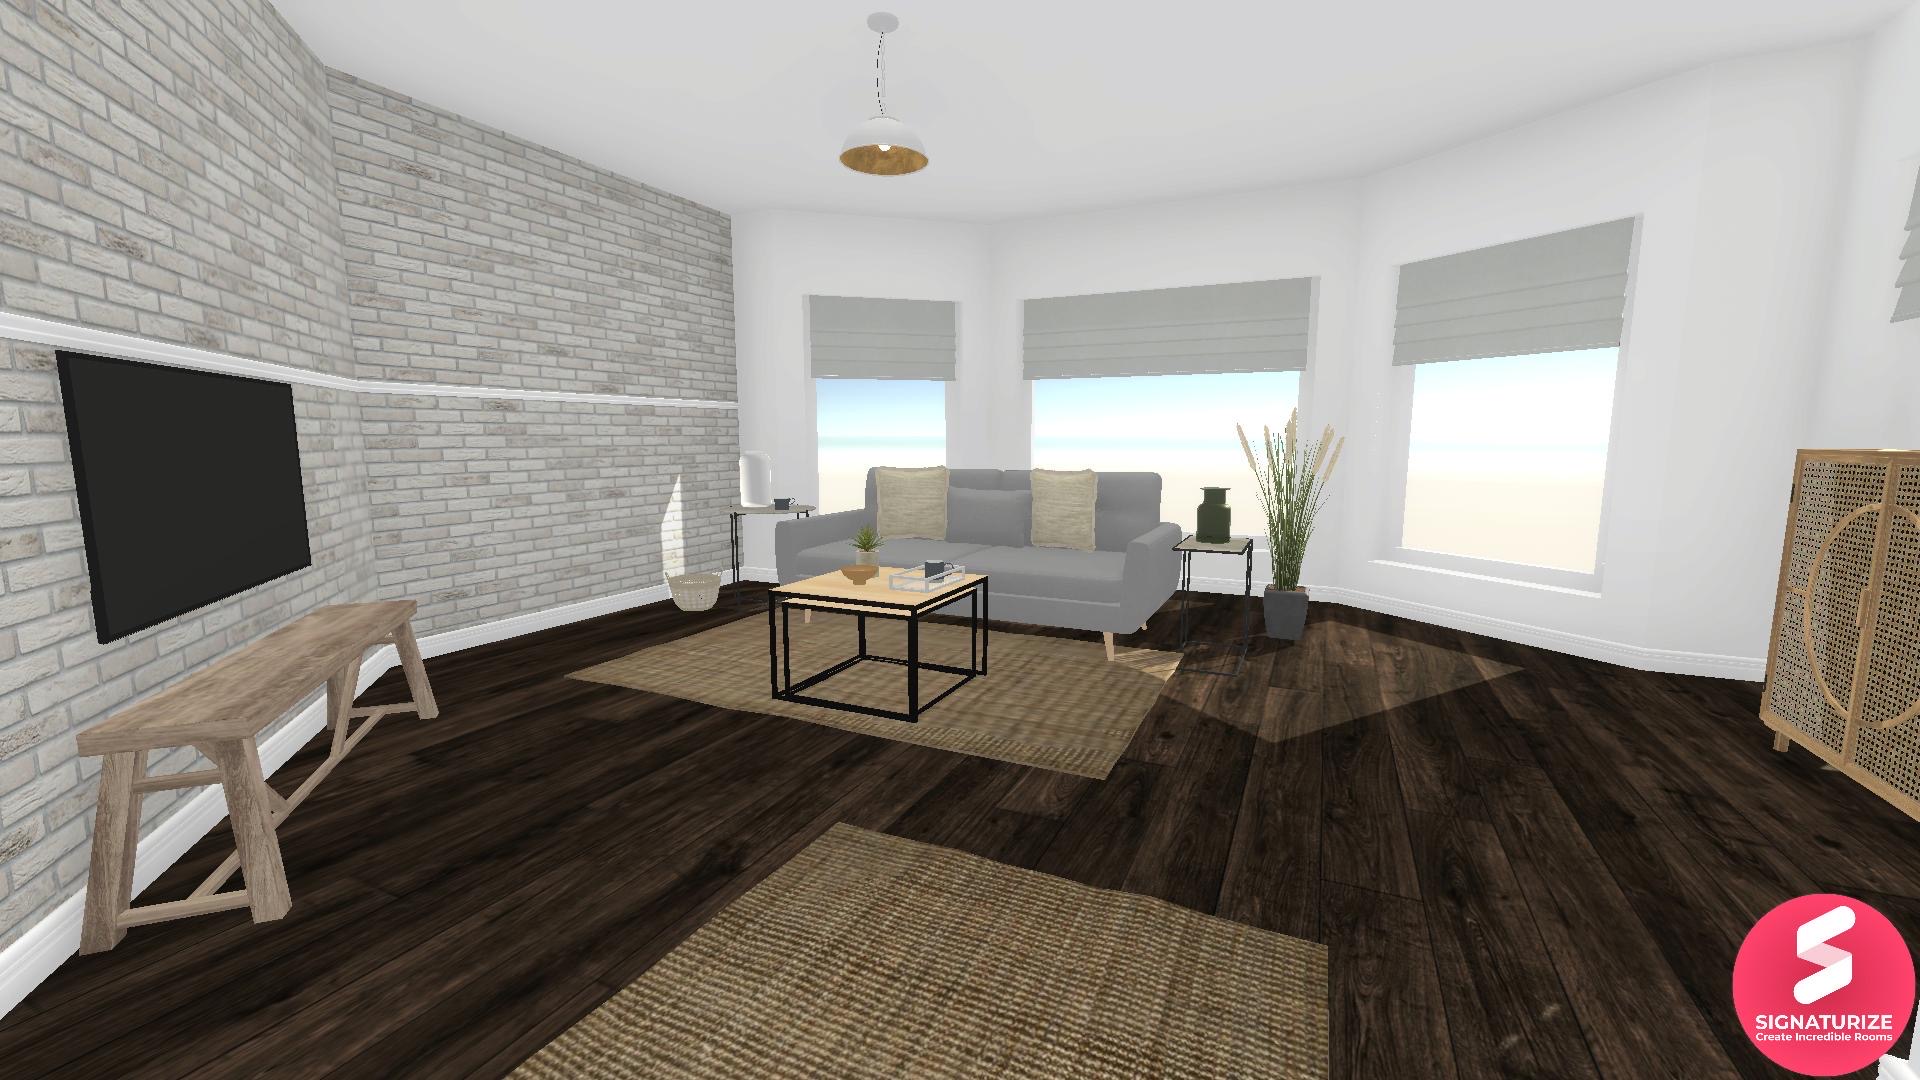 Living room with brick effect walls